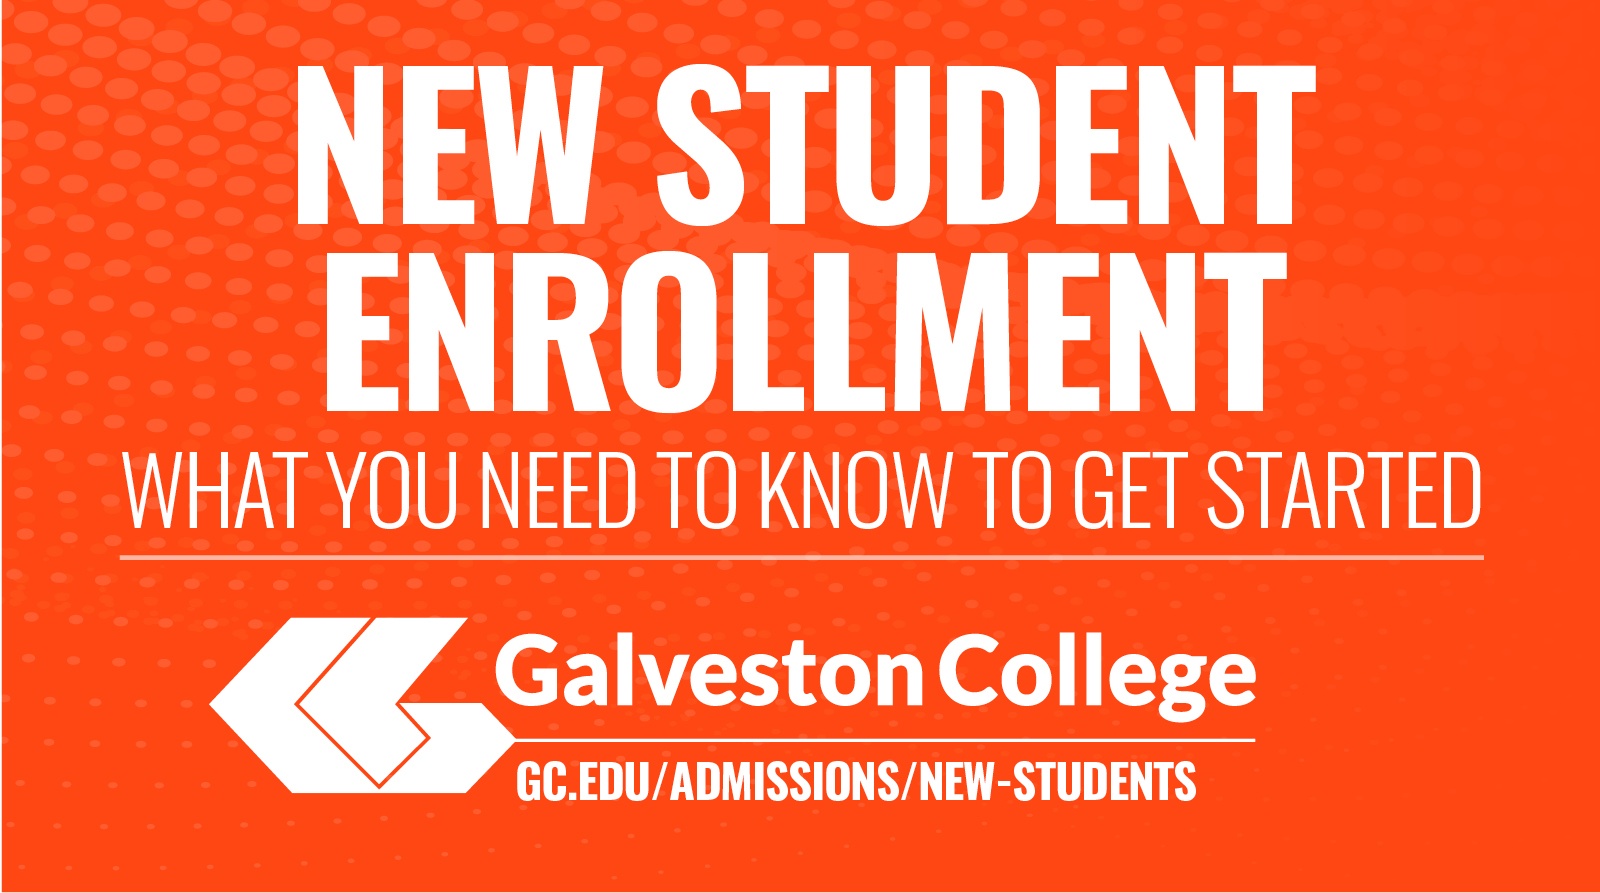 Programs And Courses Available At Galveston College